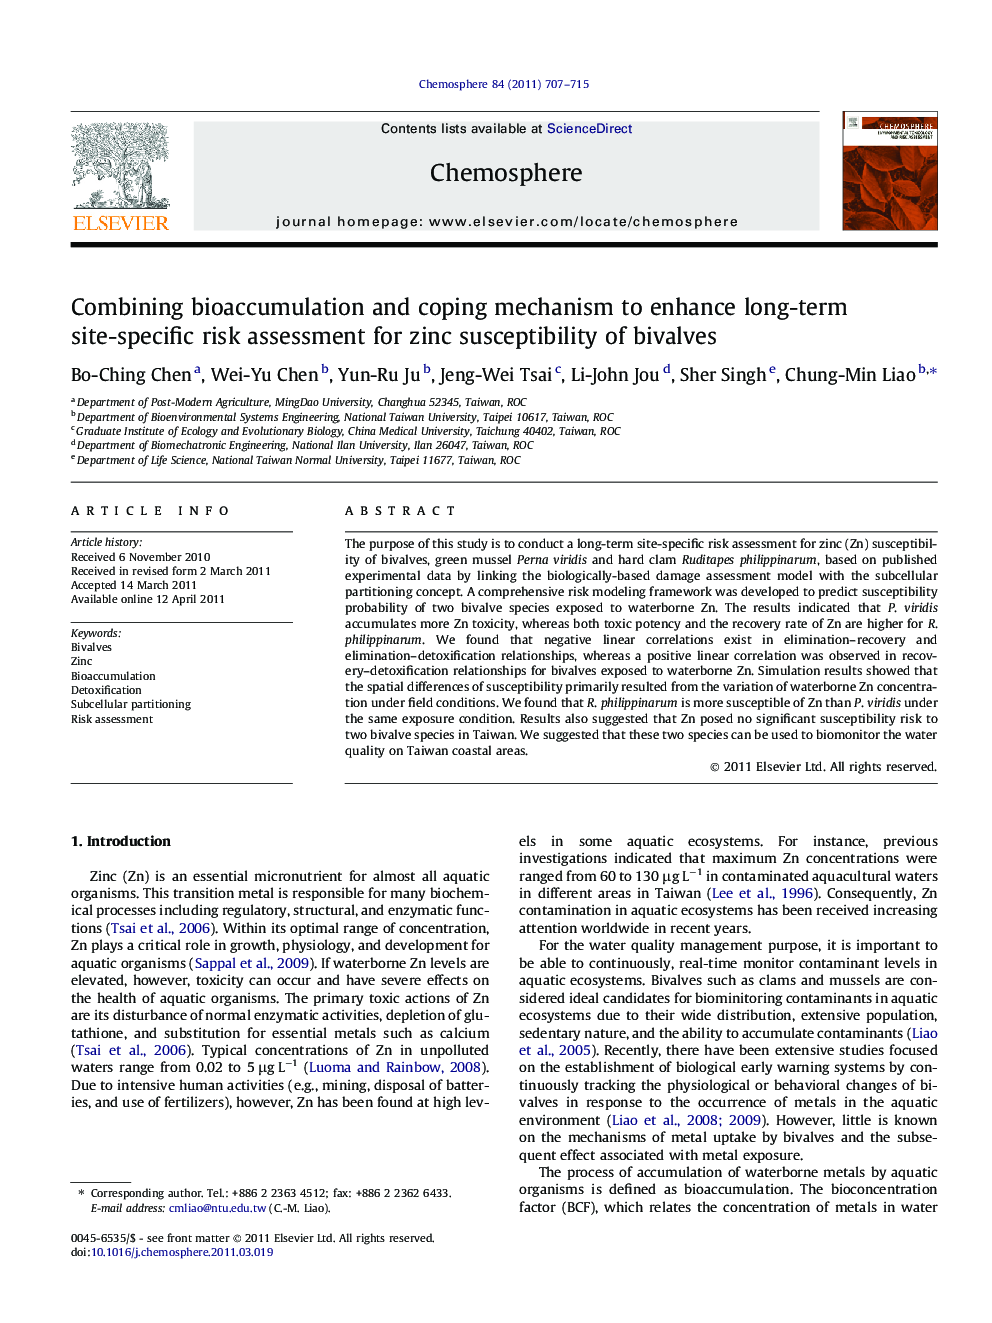 Combining bioaccumulation and coping mechanism to enhance long-term site-specific risk assessment for zinc susceptibility of bivalves